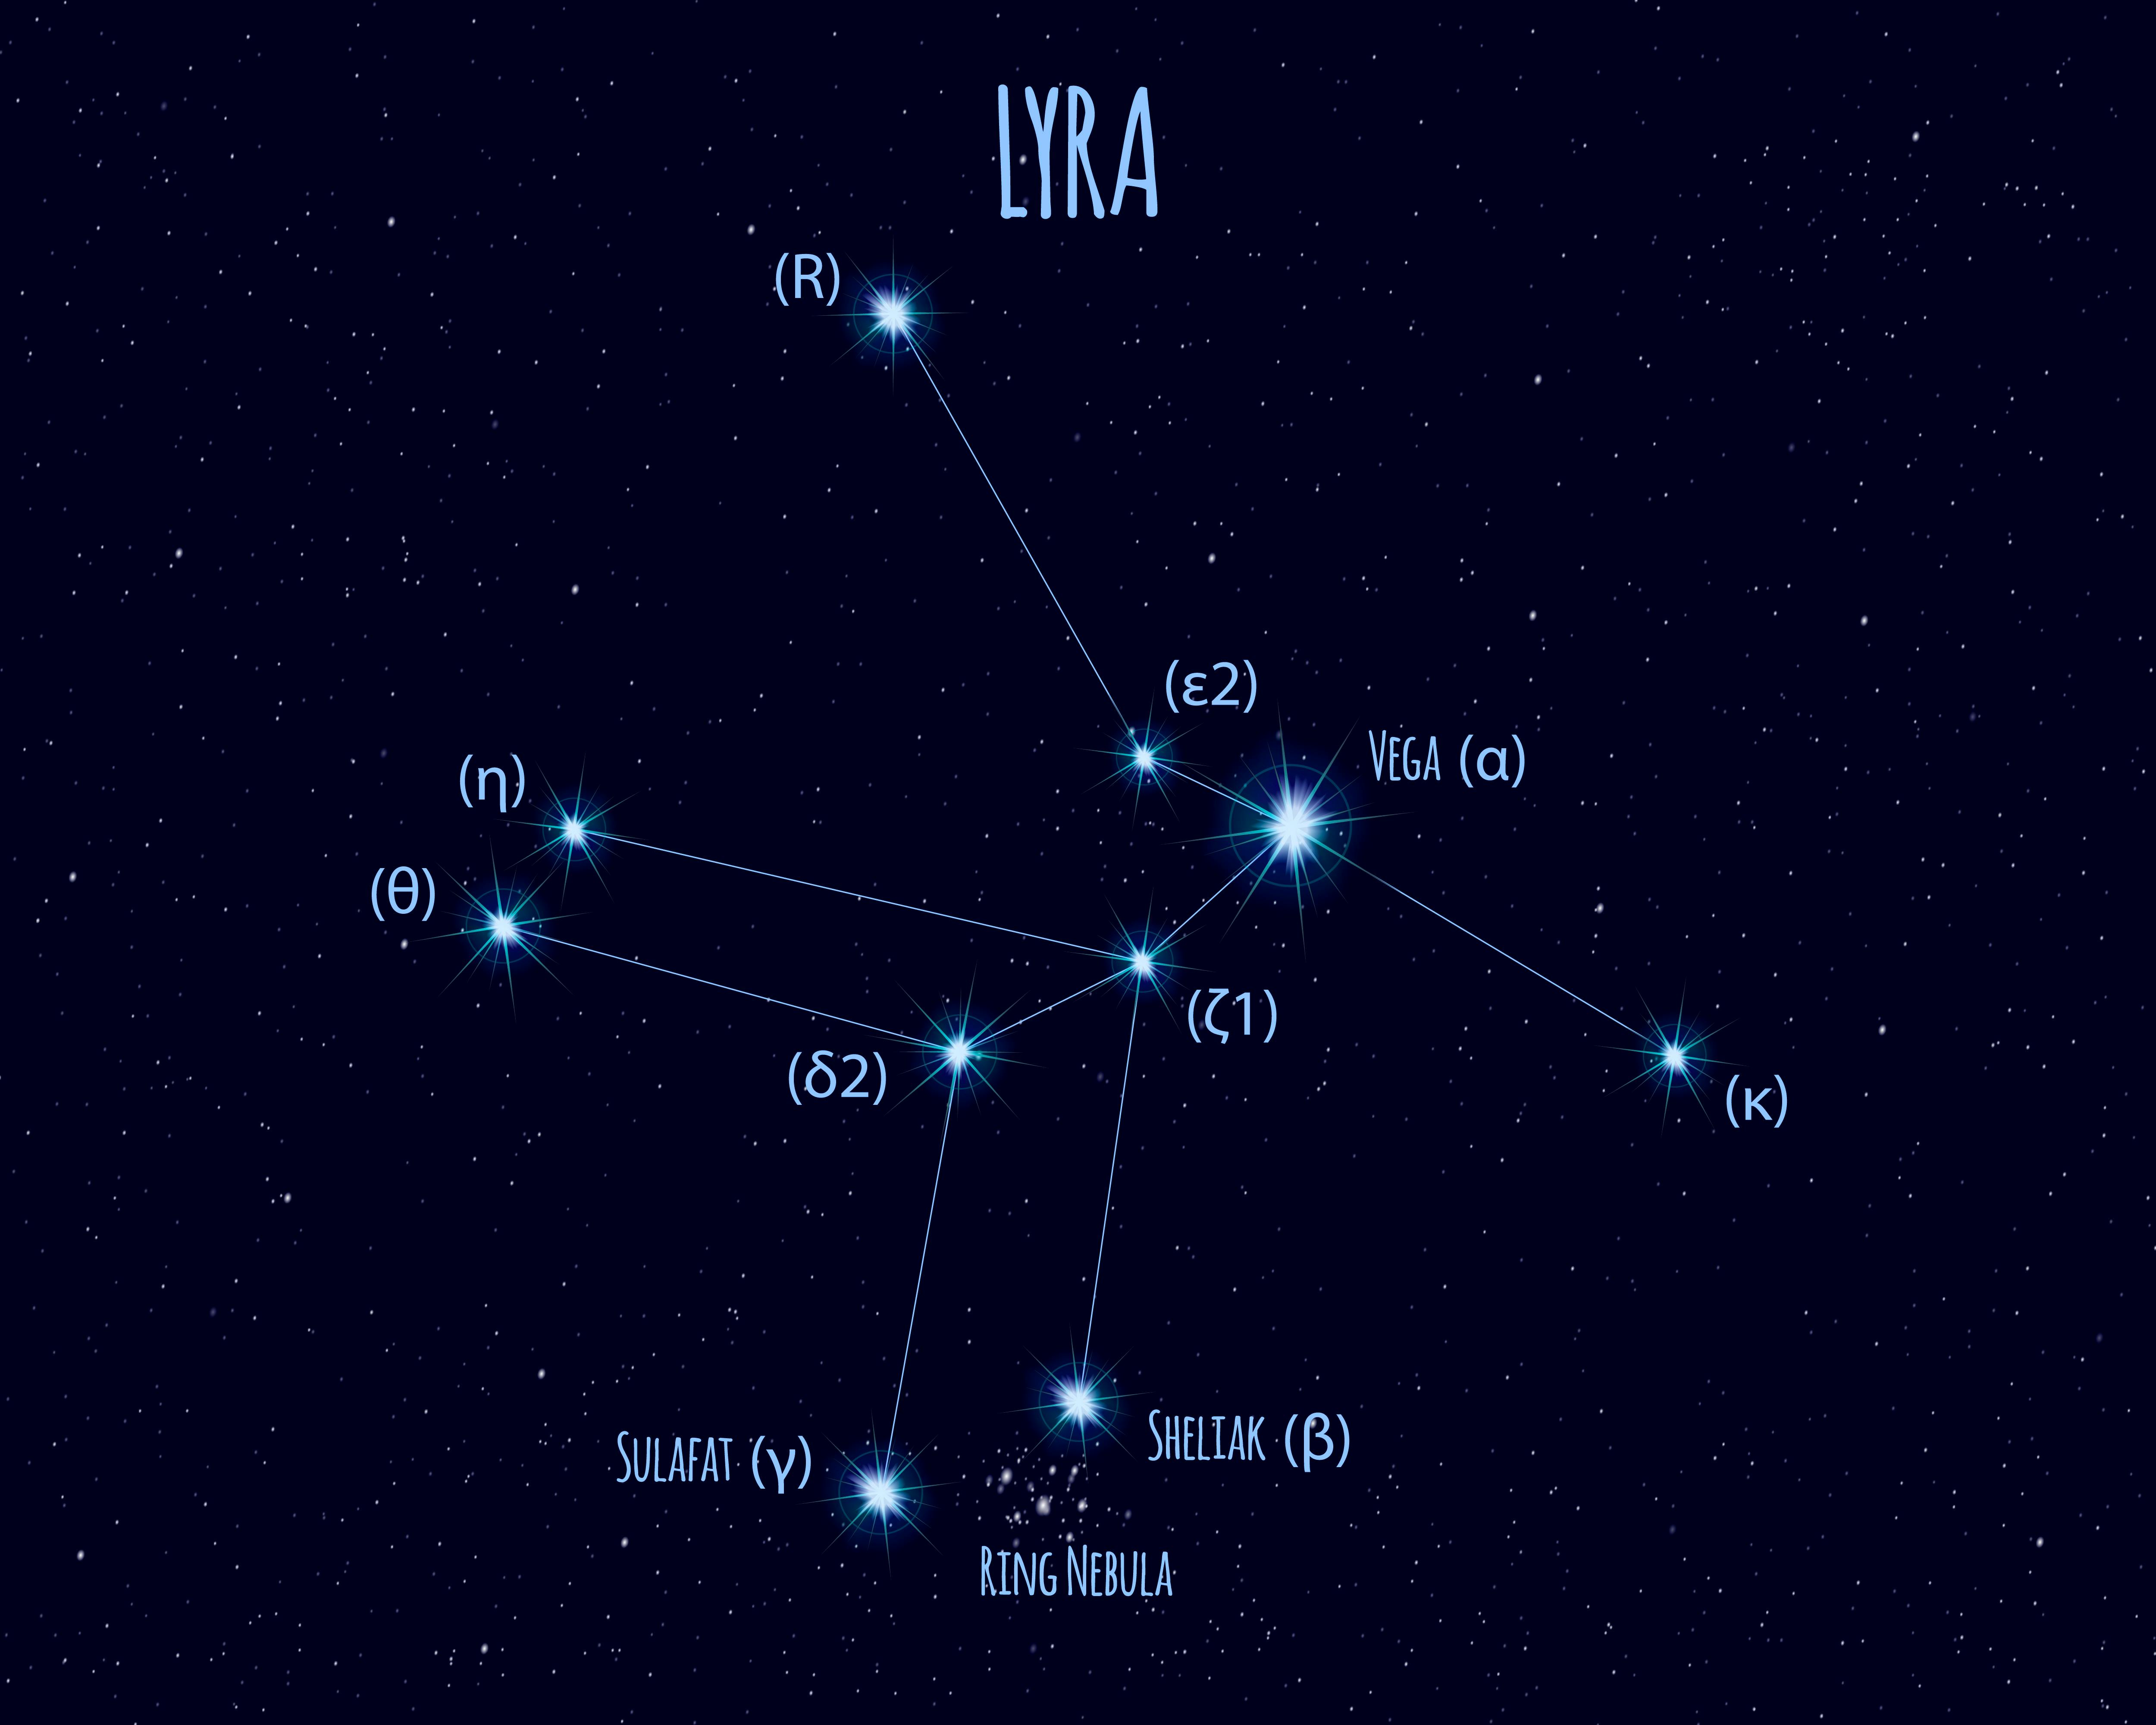 ATLANTIC SKIES Learn about Lyra: Constellation includes Vega and  'double-double' stars